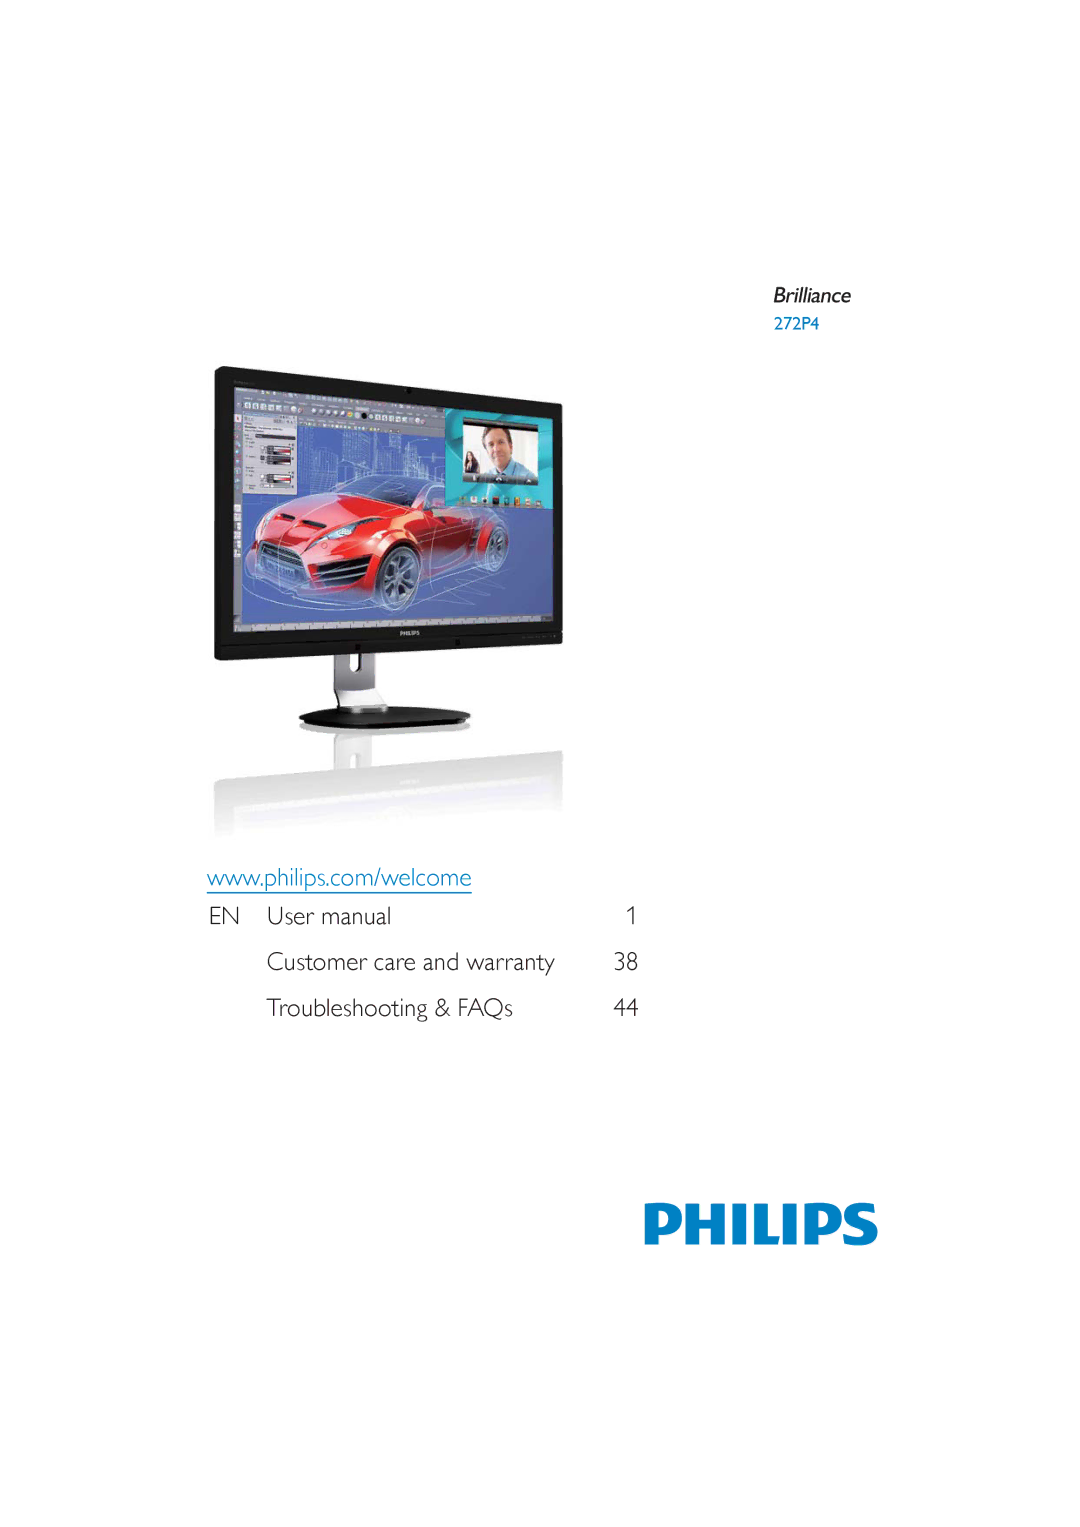 Philips 272P4 user manual Troubleshooting & FAQs 